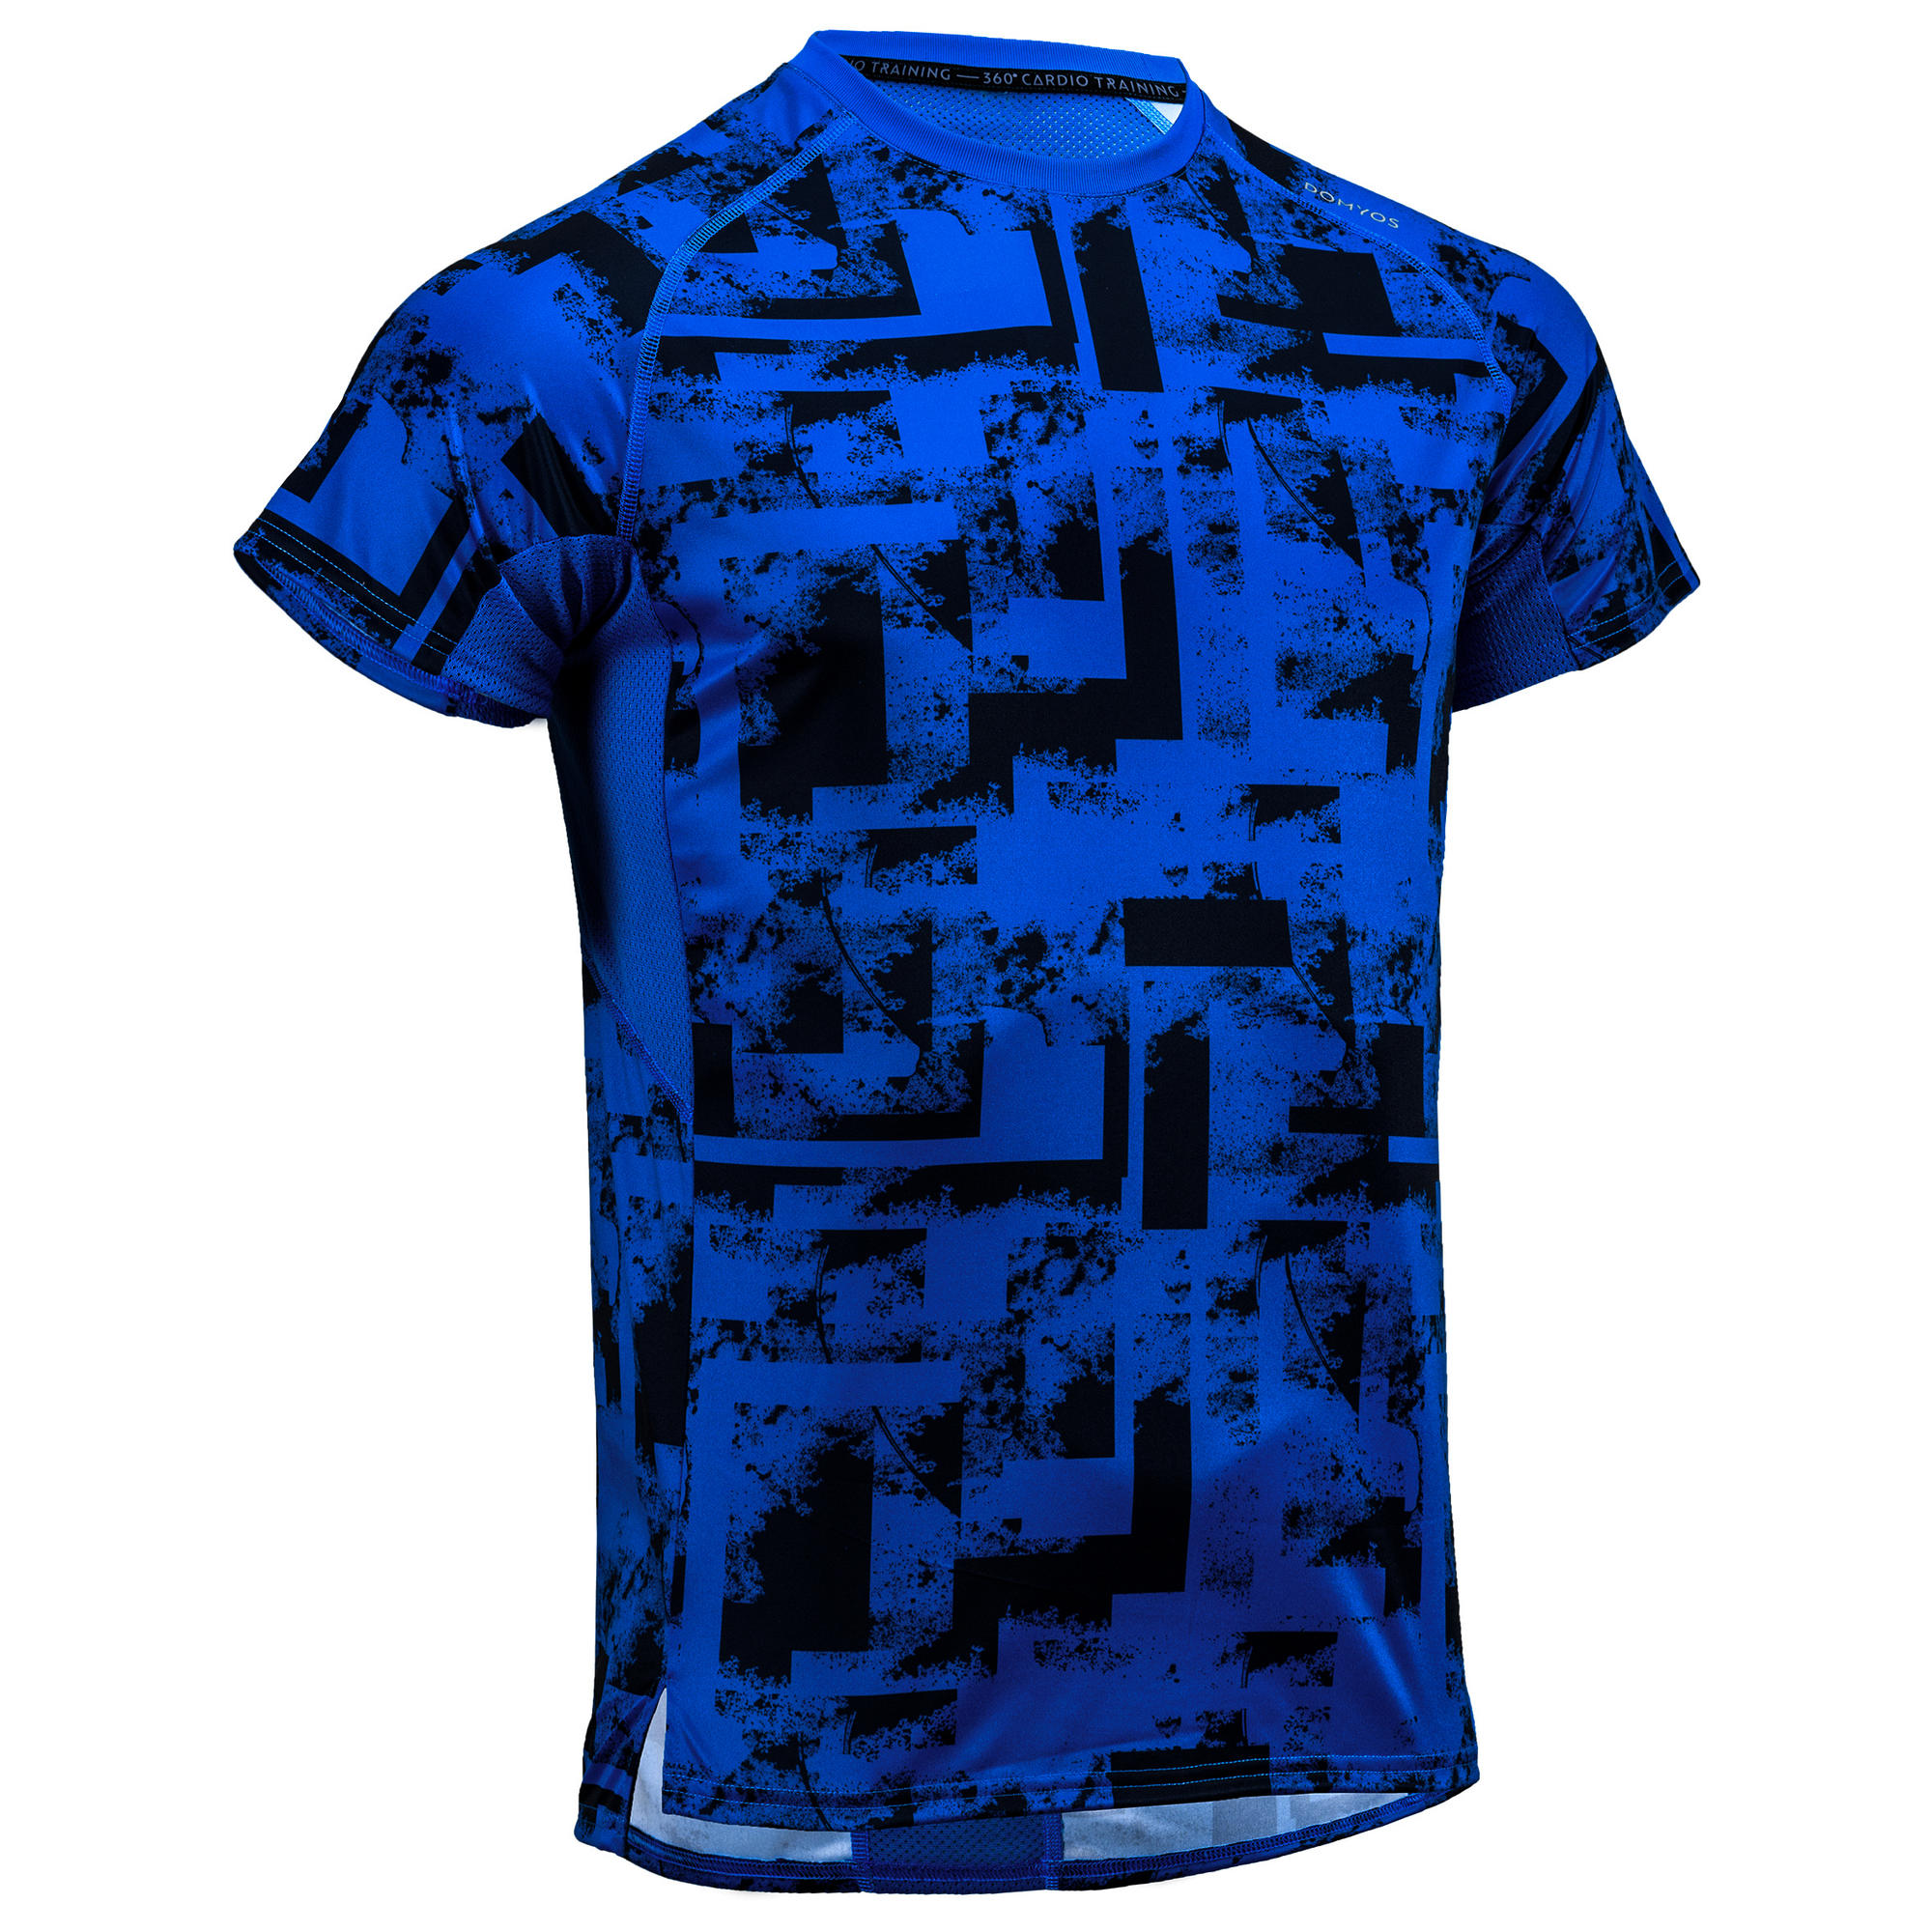 FTS 120 Cardio Fitness T-Shirt - Blue 